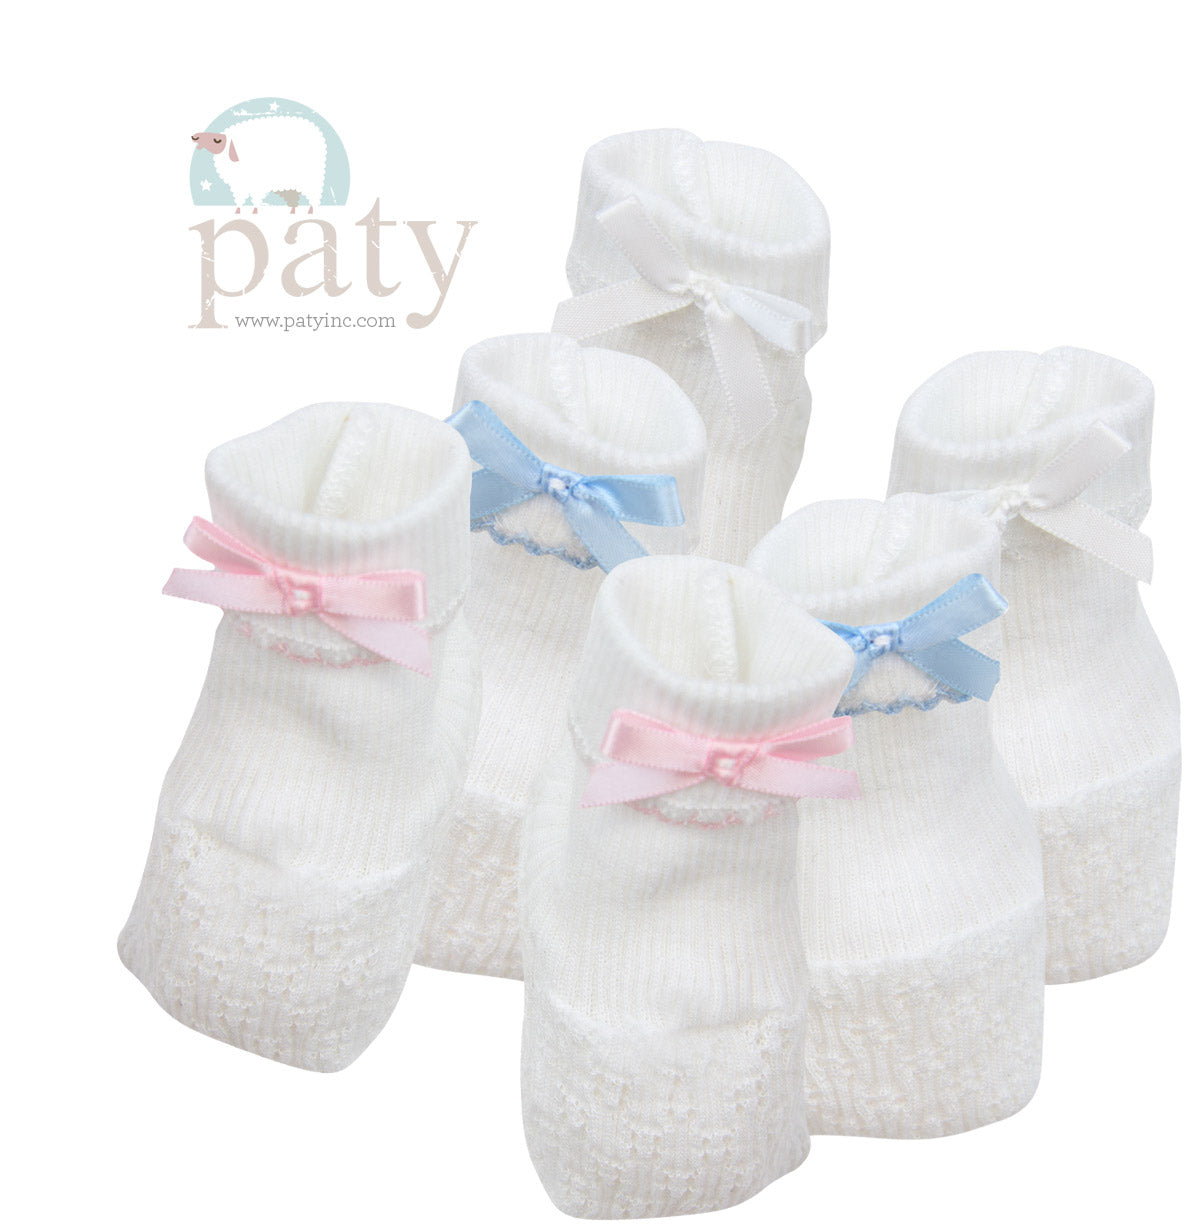 A group of Paty Booties in white with pink and blue bows.